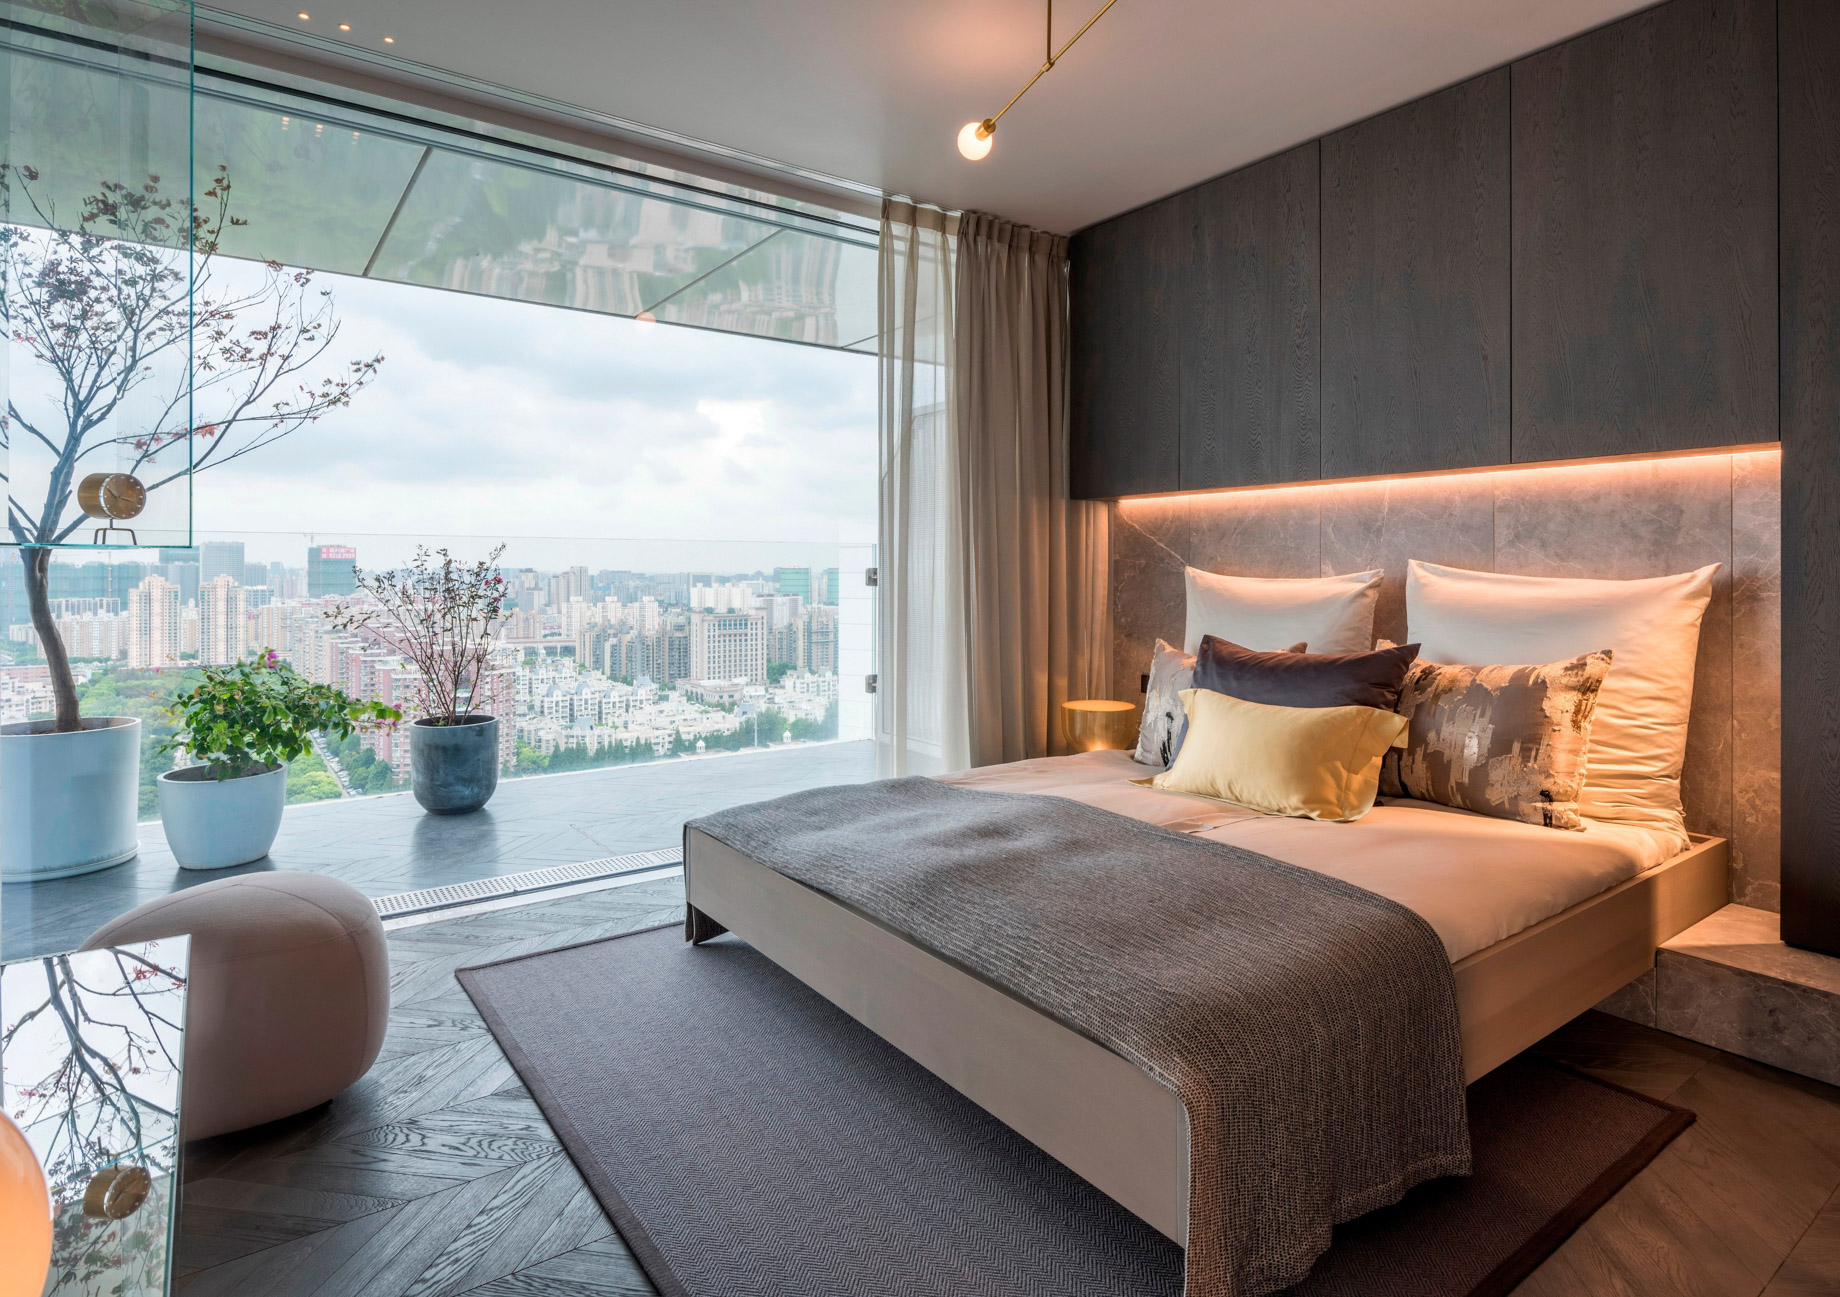 Shades of Grey Apartment Interior Design Shanghai, China - Ippolito Fleitz Group - Bedroom Floor to Ceiling Window View